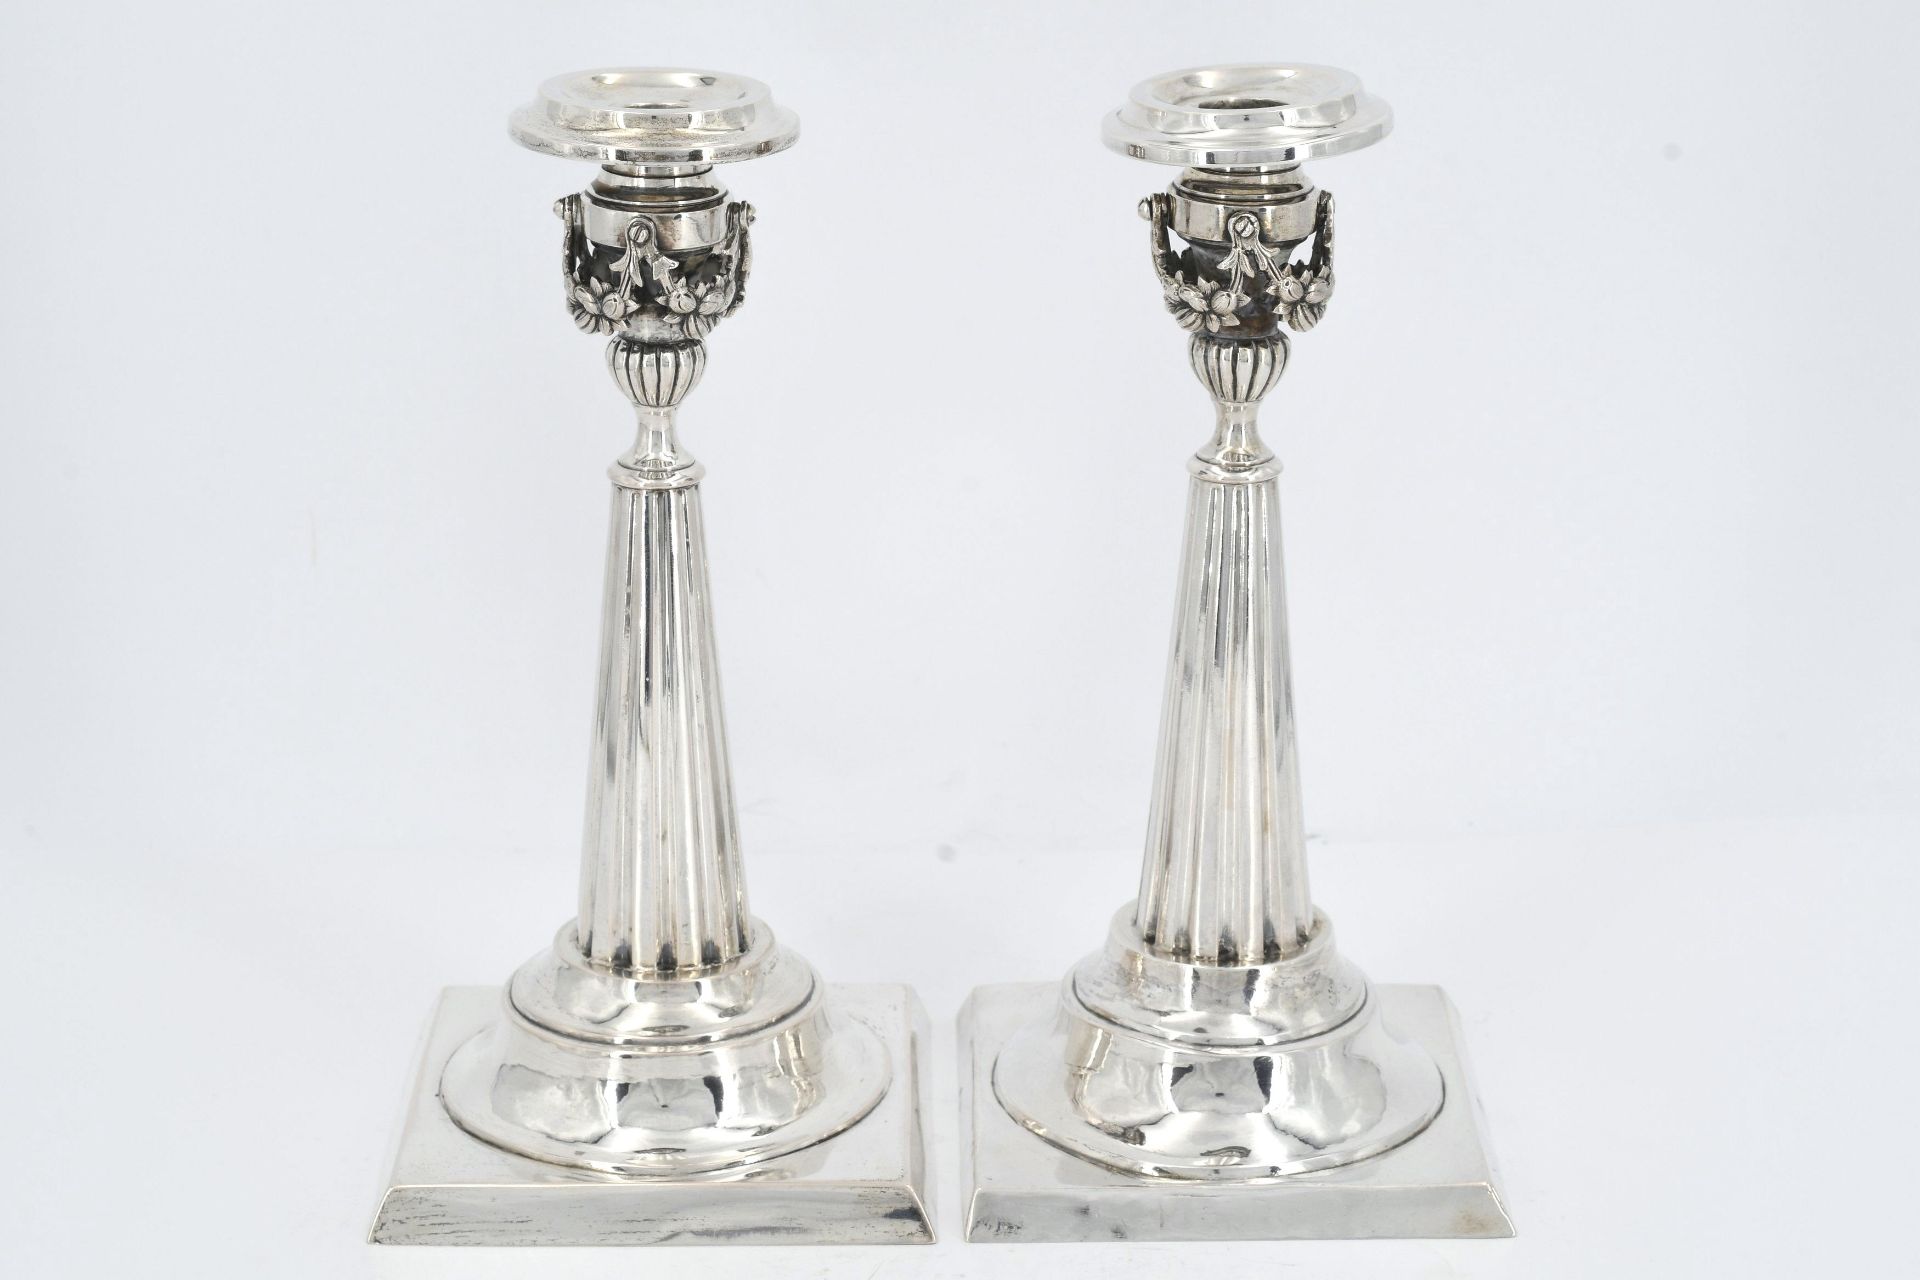 Pair of silver candlesticks with fluted shaft and festoons - Image 5 of 6